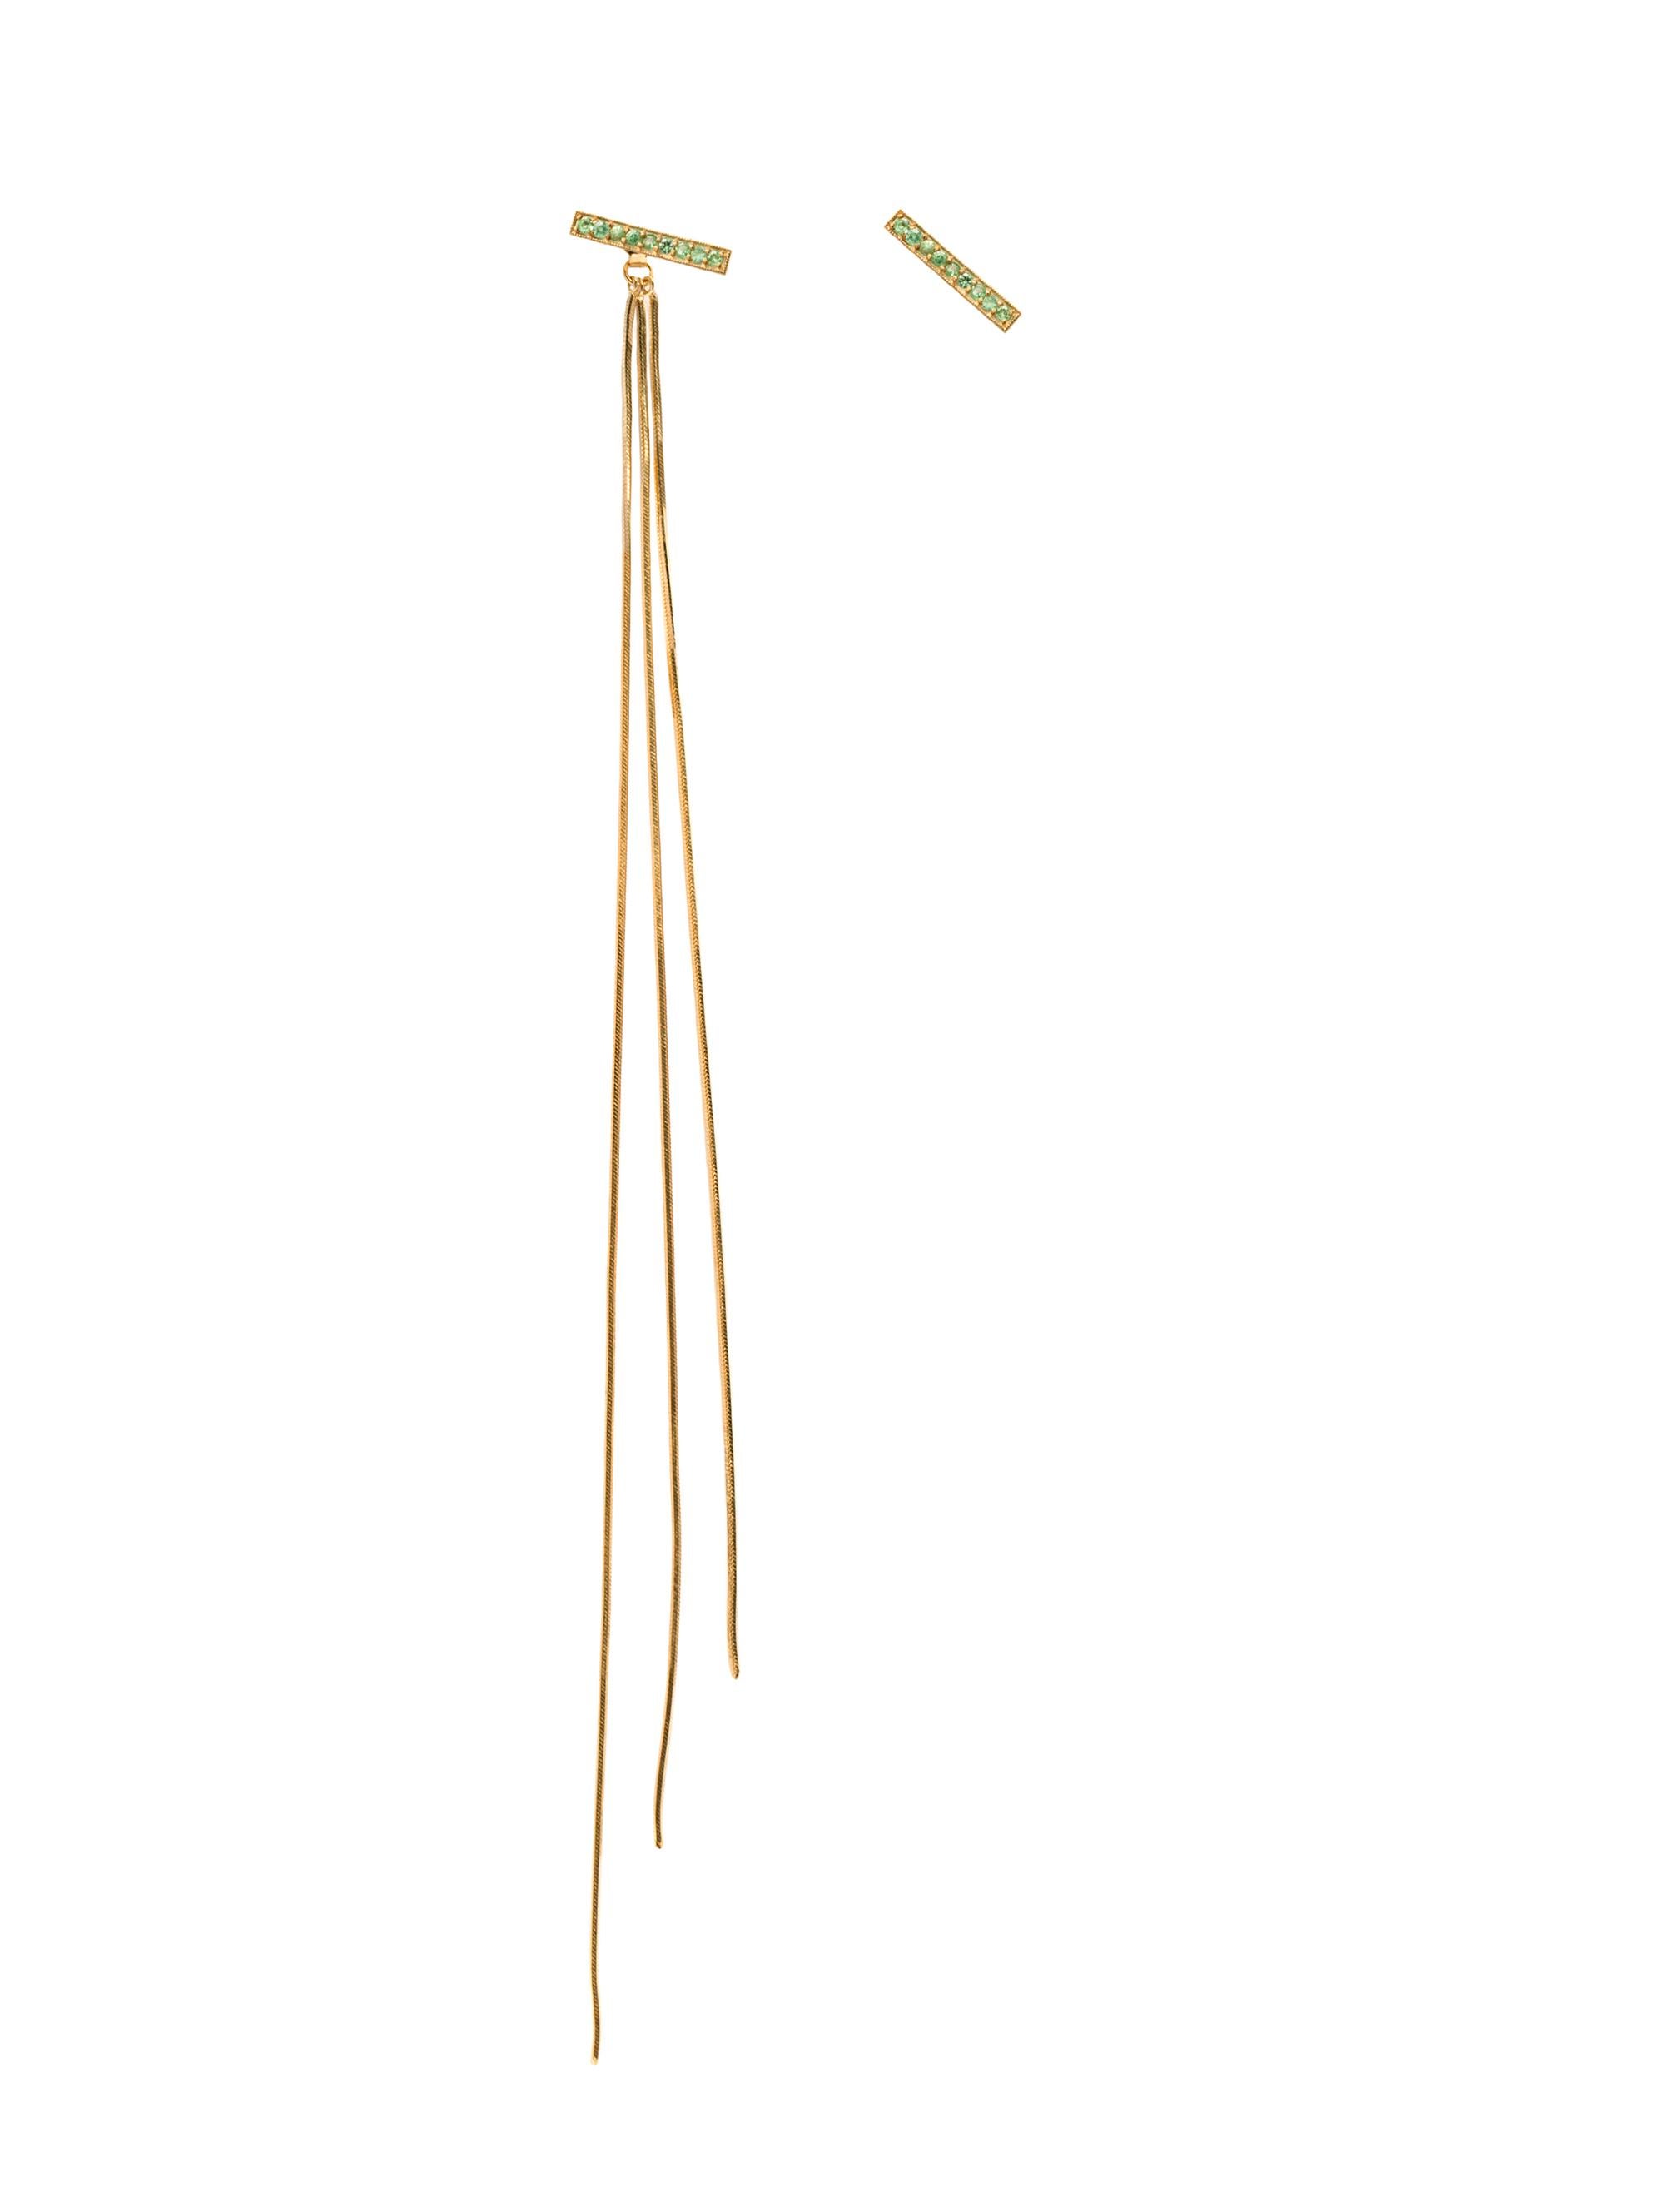 Add jewellery with a modern, strong feminine attitude to your outfit with this 9 karat gold long multithread earring from Iosselliani. Three discendent threads are secured to the push back post to add a sweeping effect to the 0,21 carats green